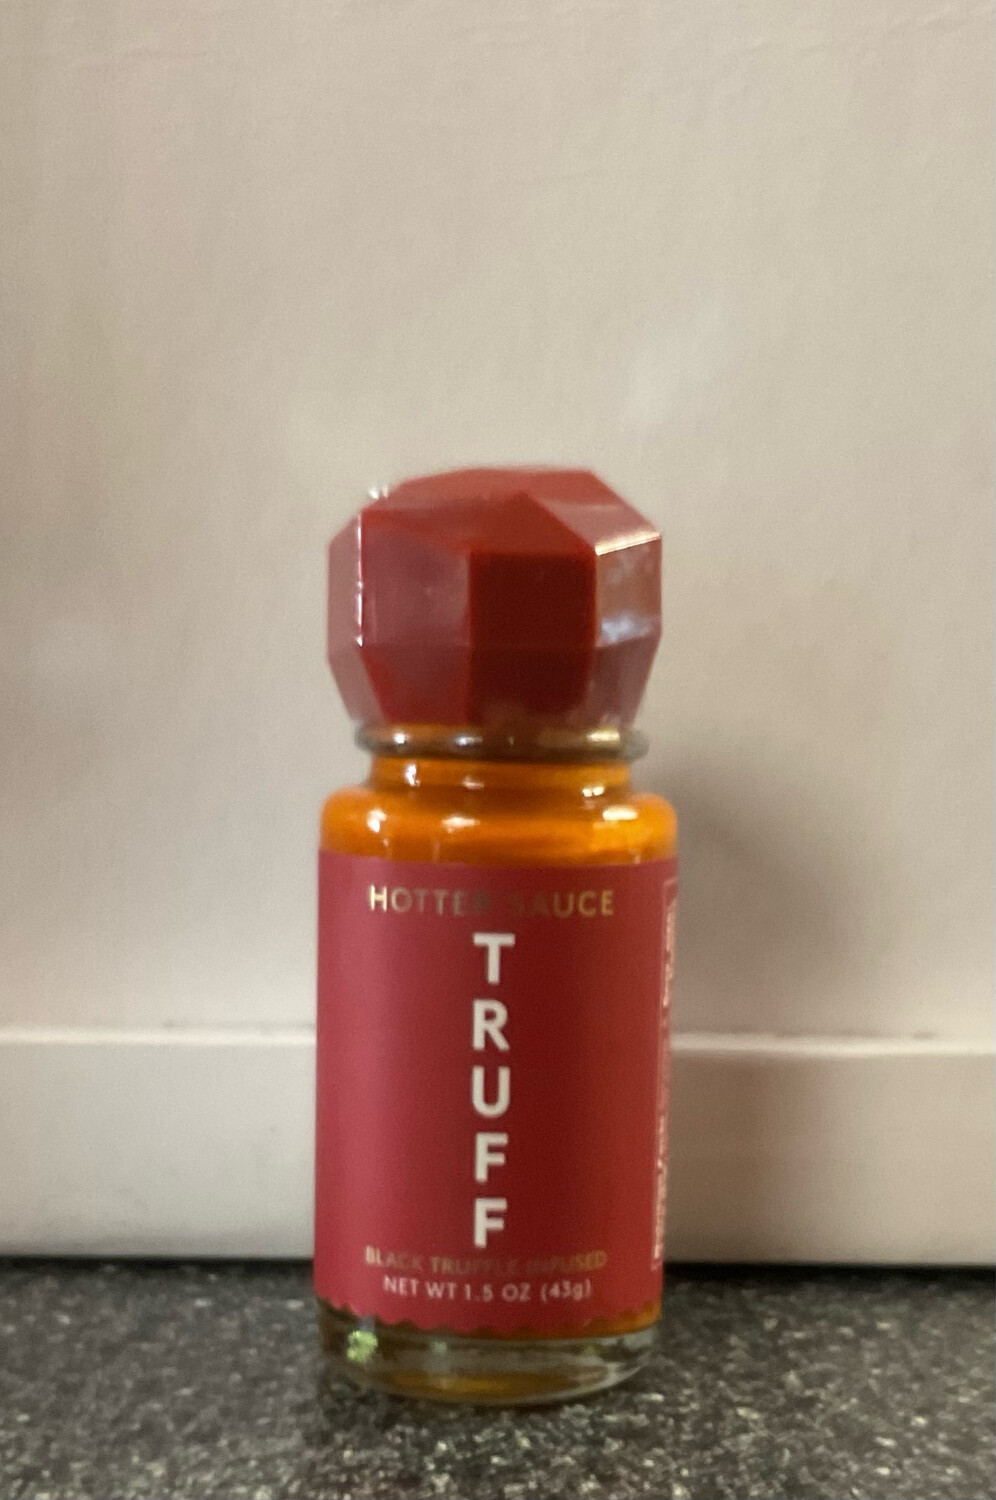 Truff Red 1.5 oz Hotter Sauce